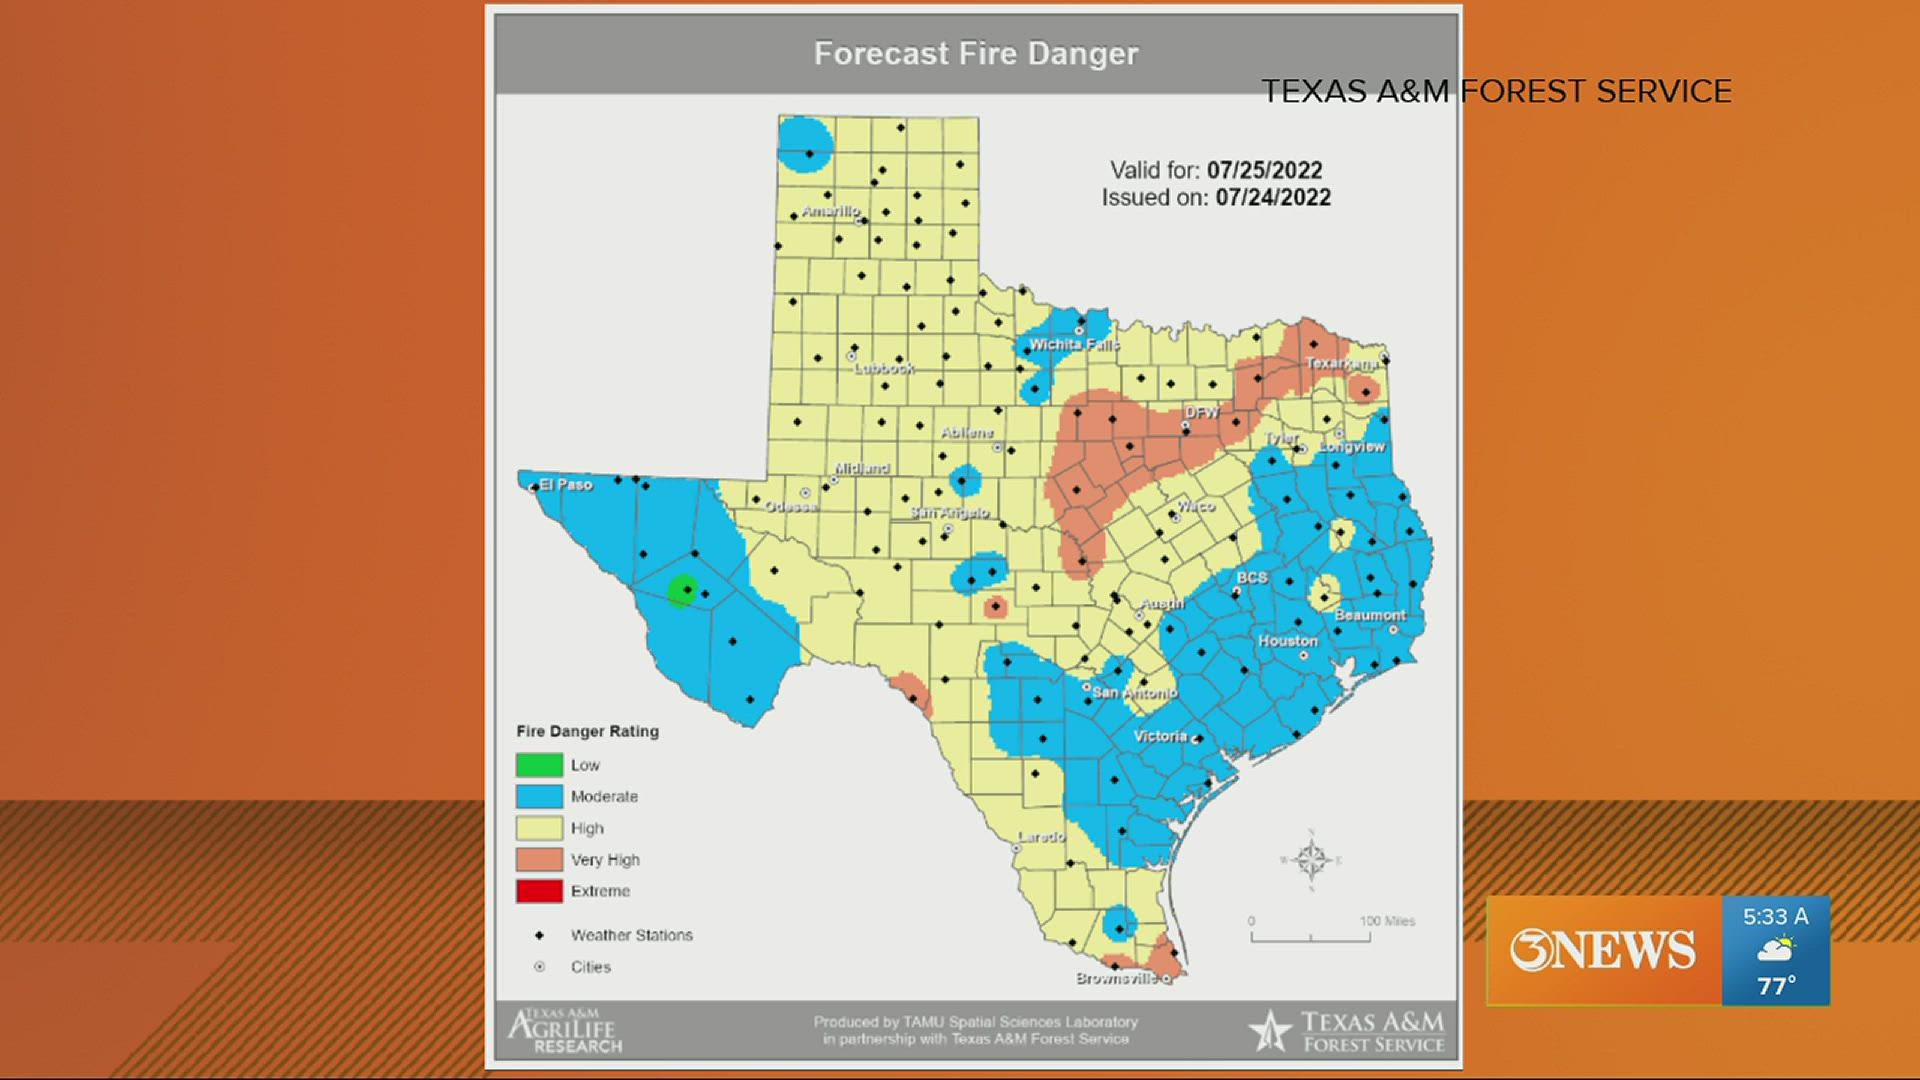 Wildfire risk in Texas